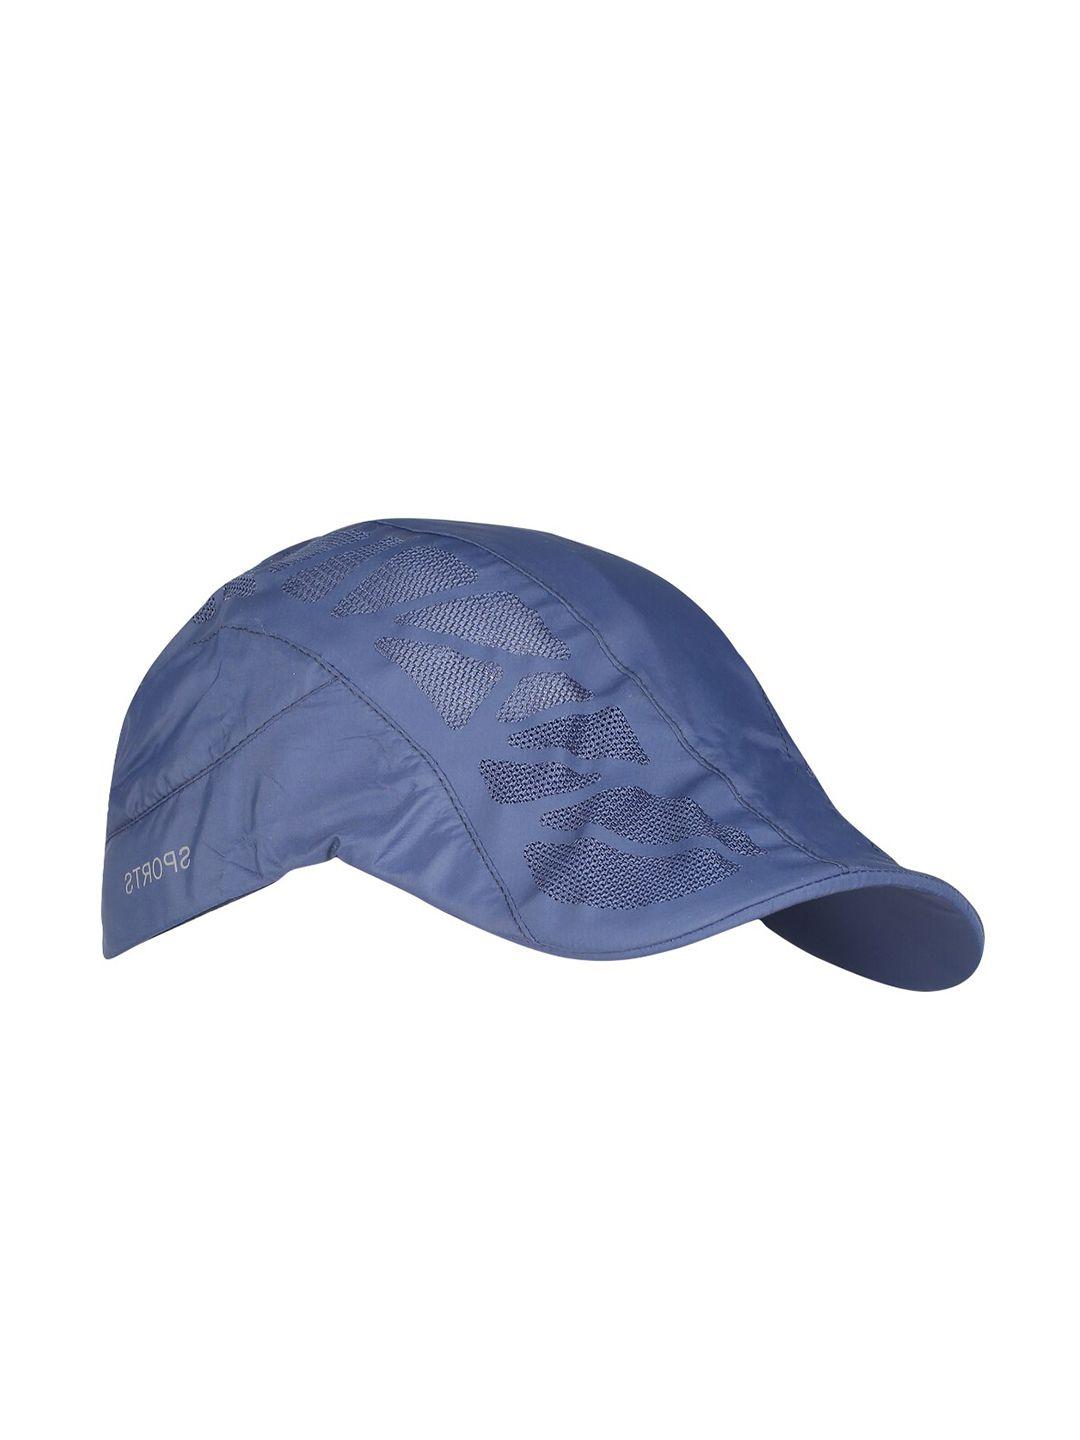 isweven unisex blue printed ascot cap